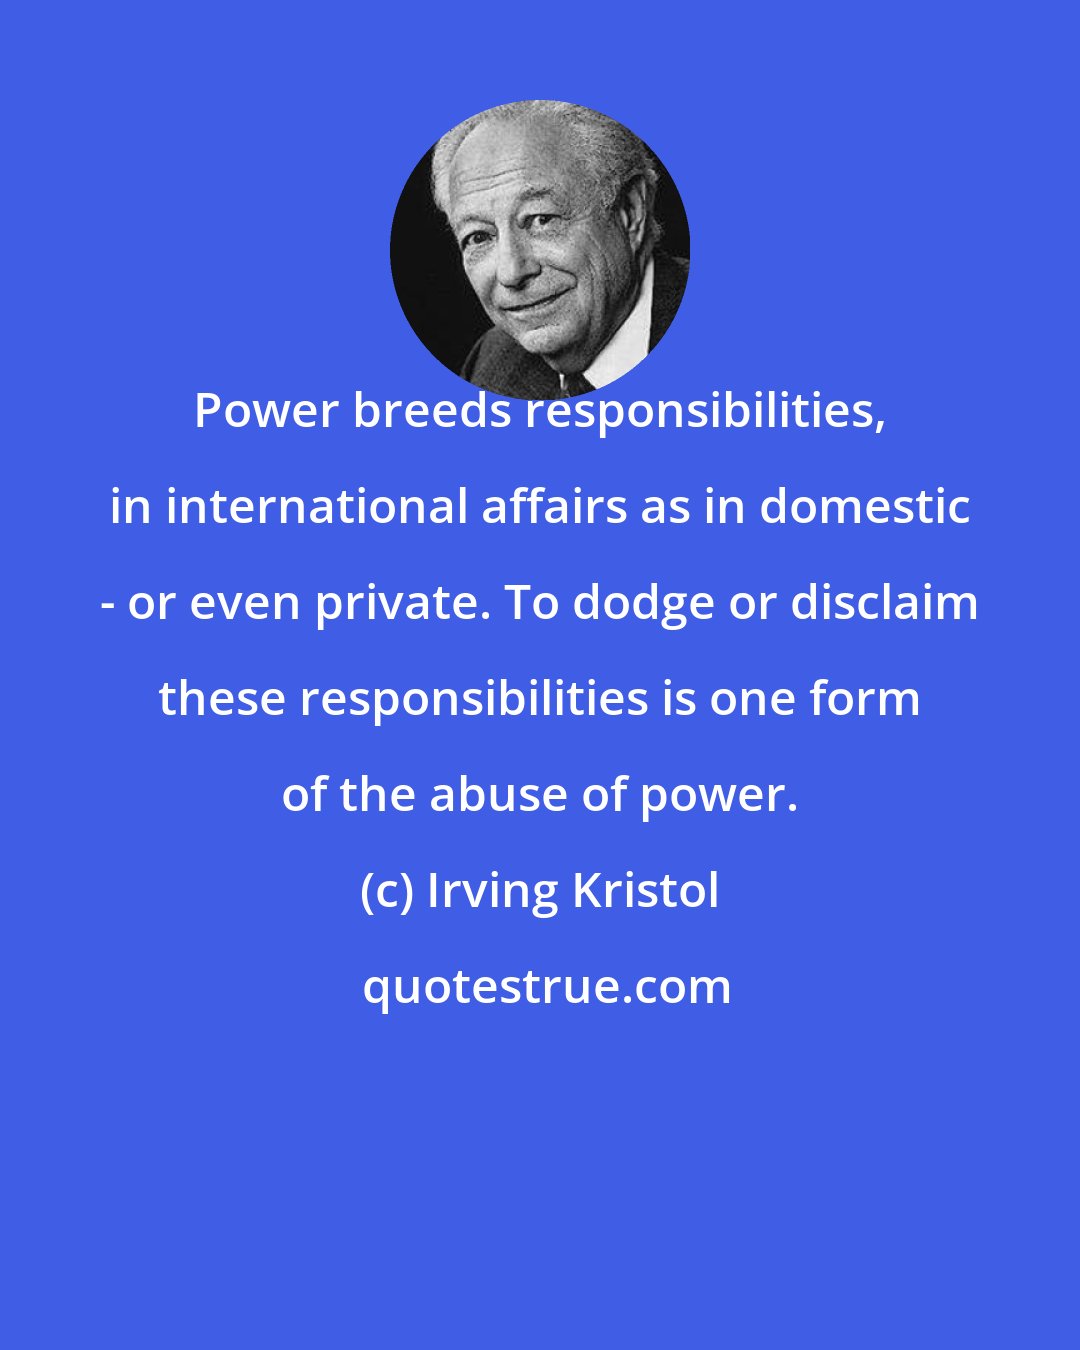 Irving Kristol: Power breeds responsibilities, in international affairs as in domestic - or even private. To dodge or disclaim these responsibilities is one form of the abuse of power.